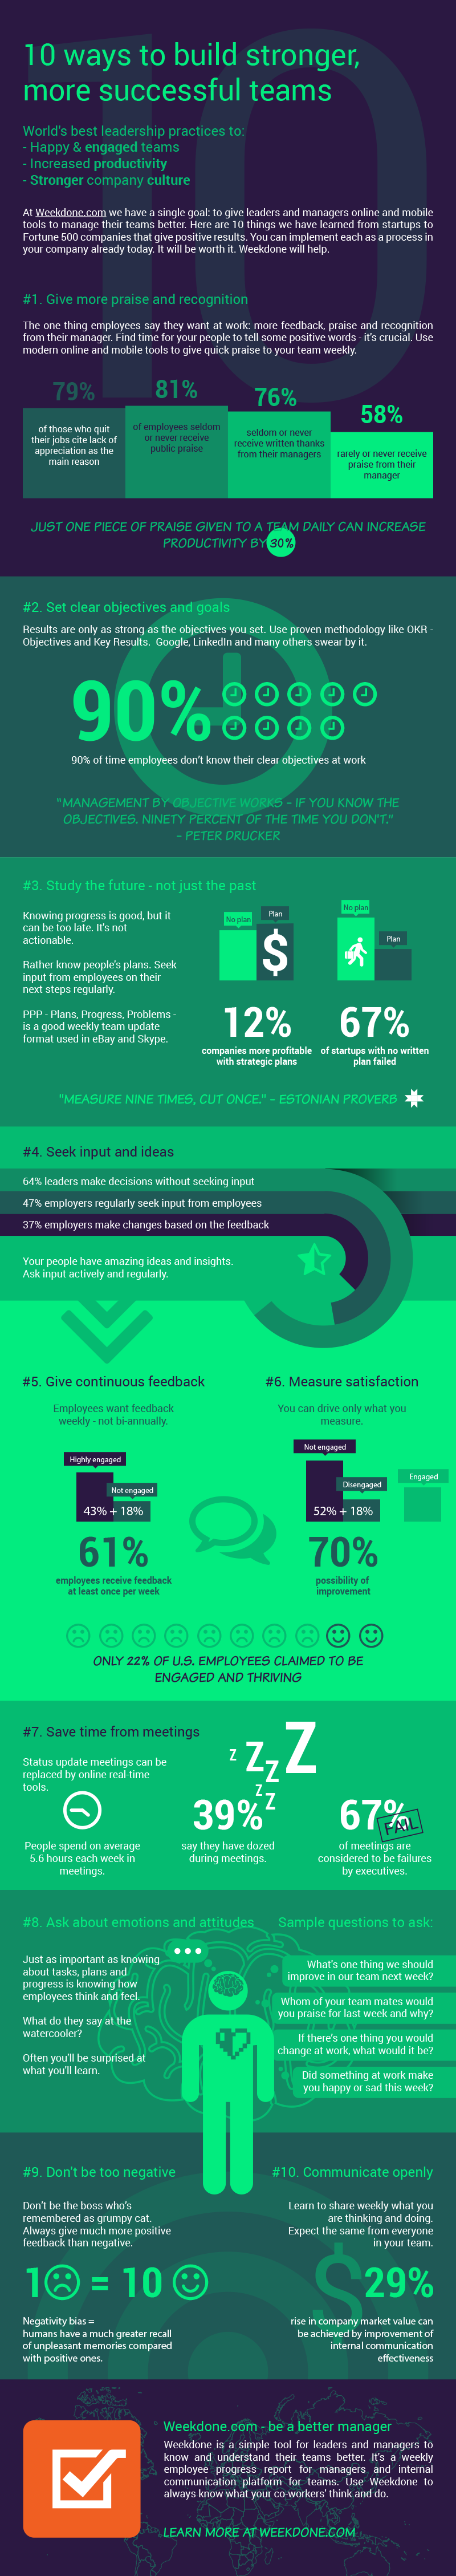 infographic-be-a-better-manager